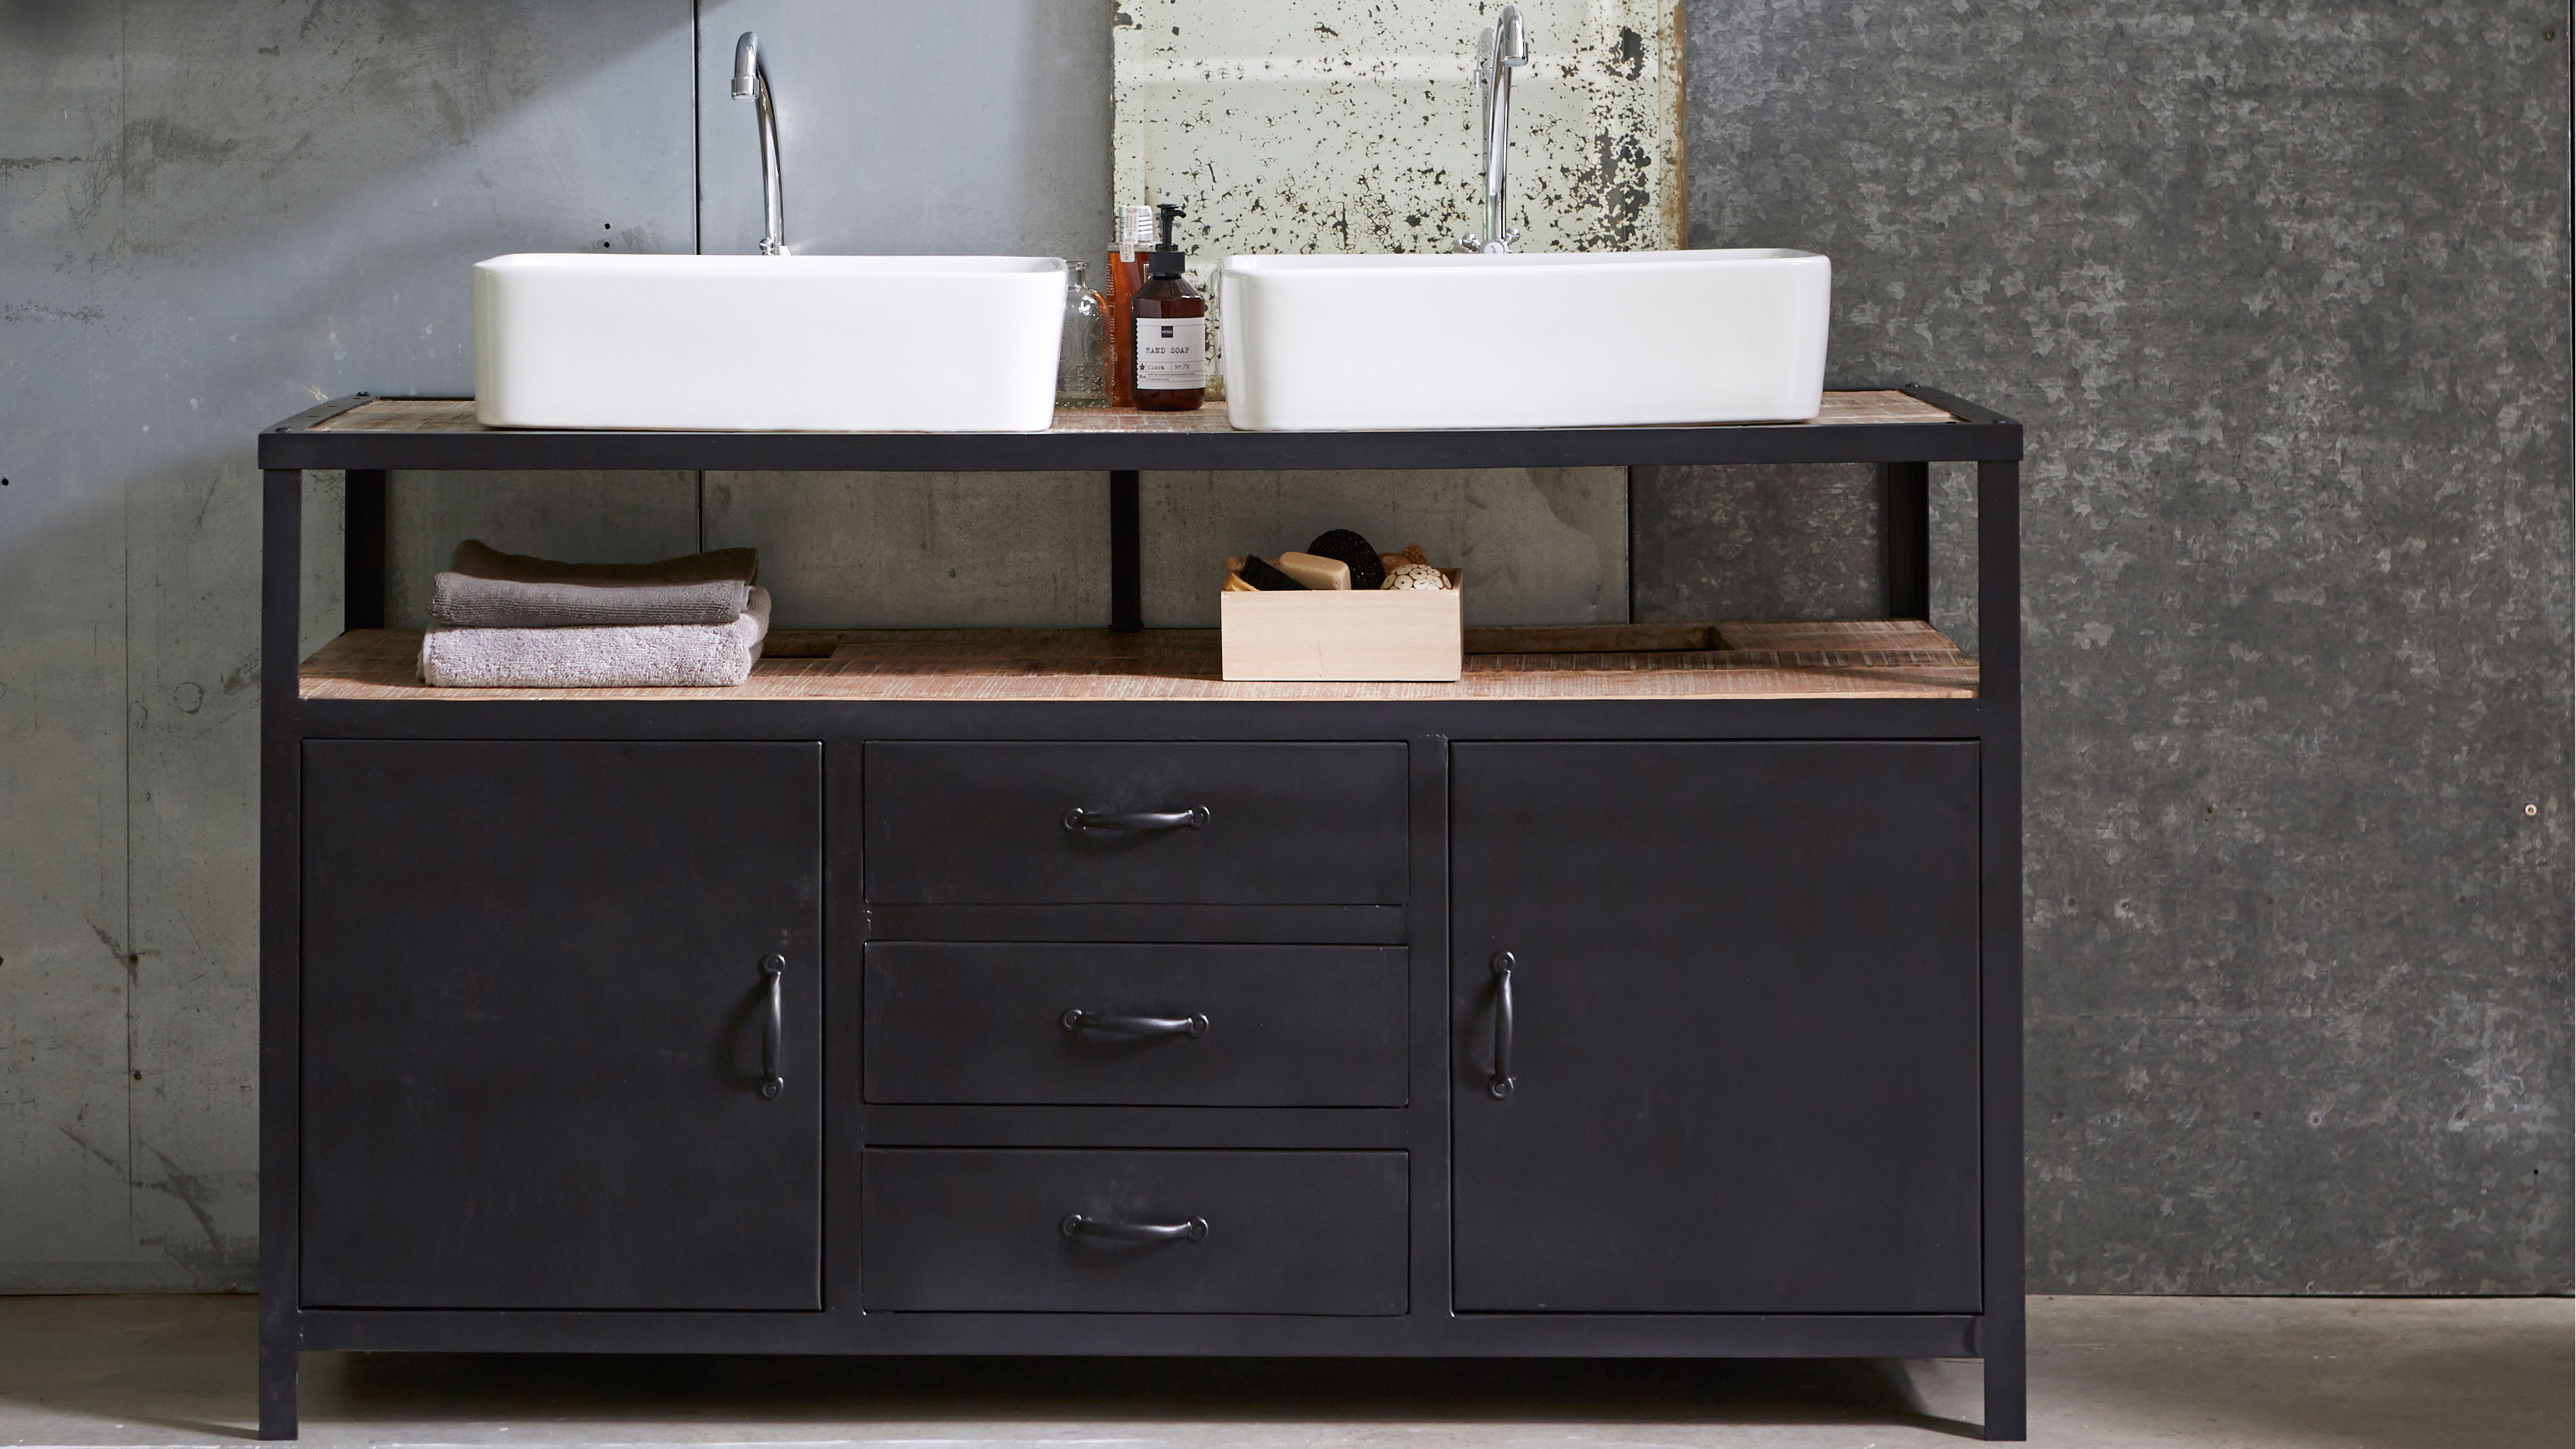 10 Of The Best Vanity Units Real Homes, Small Double Sink Vanity Unit